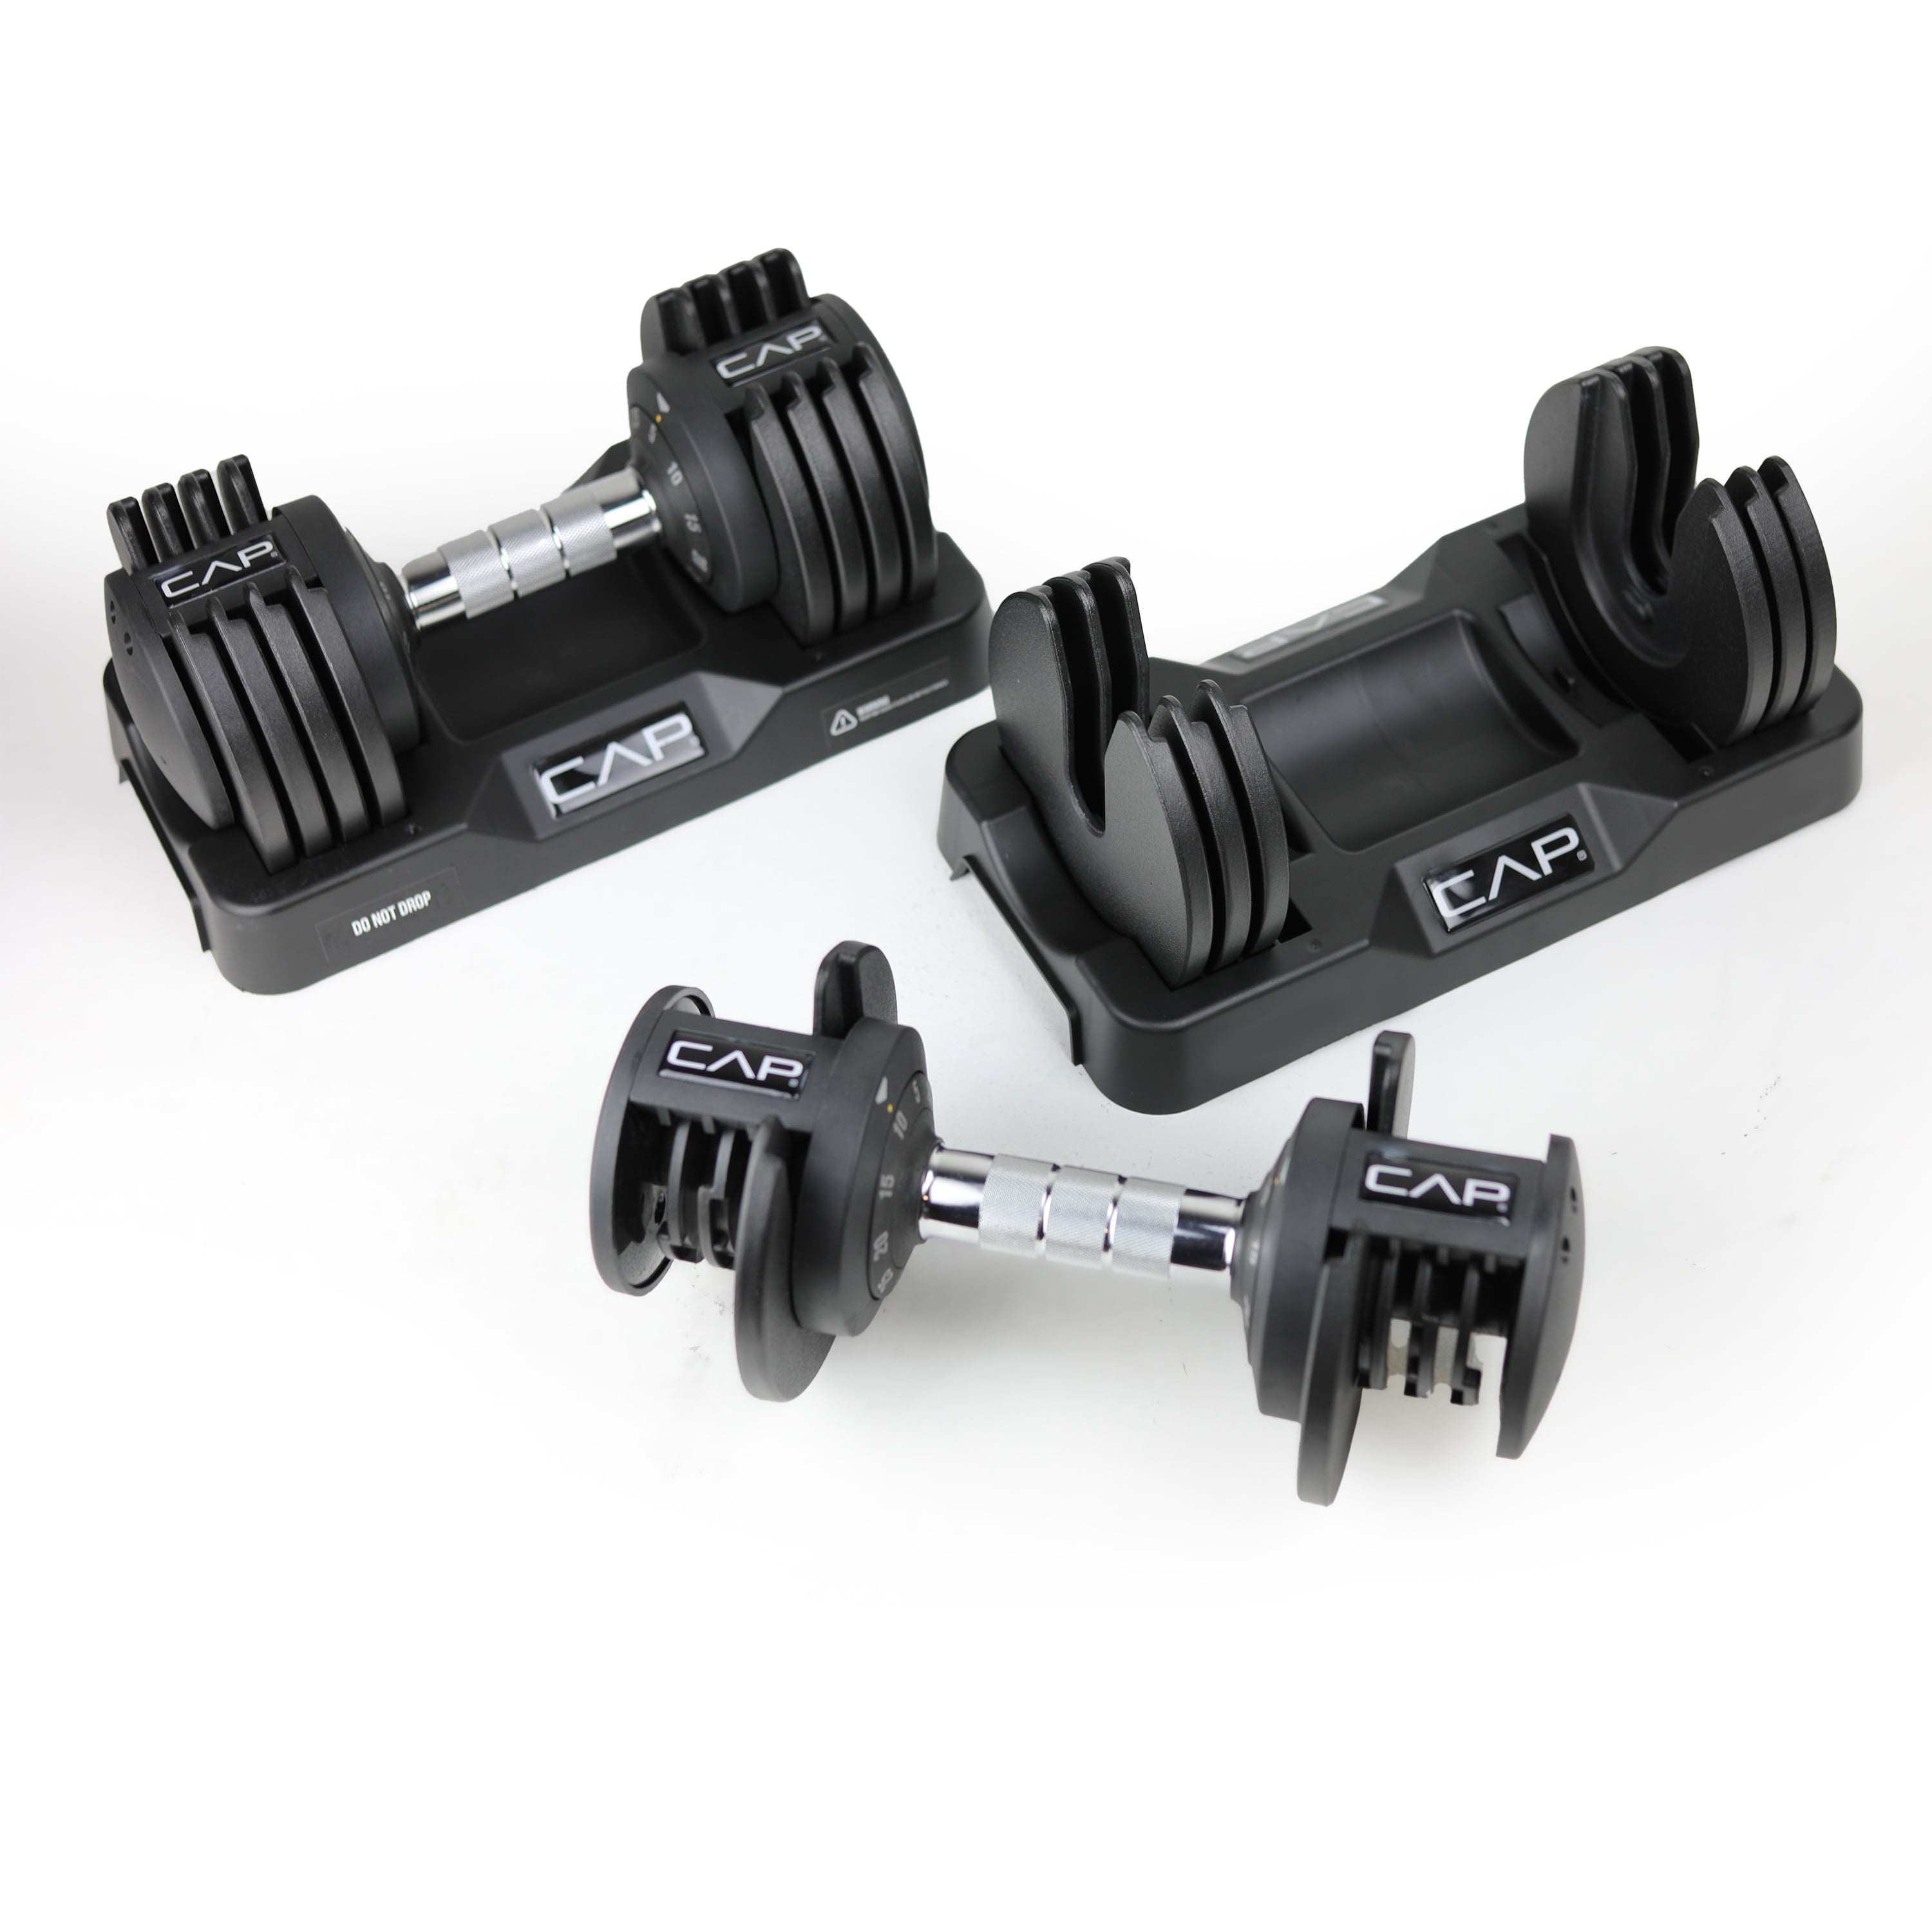 Ready to Ship FAST SHIPPING CAP Dumbbell 40 lb Adjustable Vinyl Set In Hand 